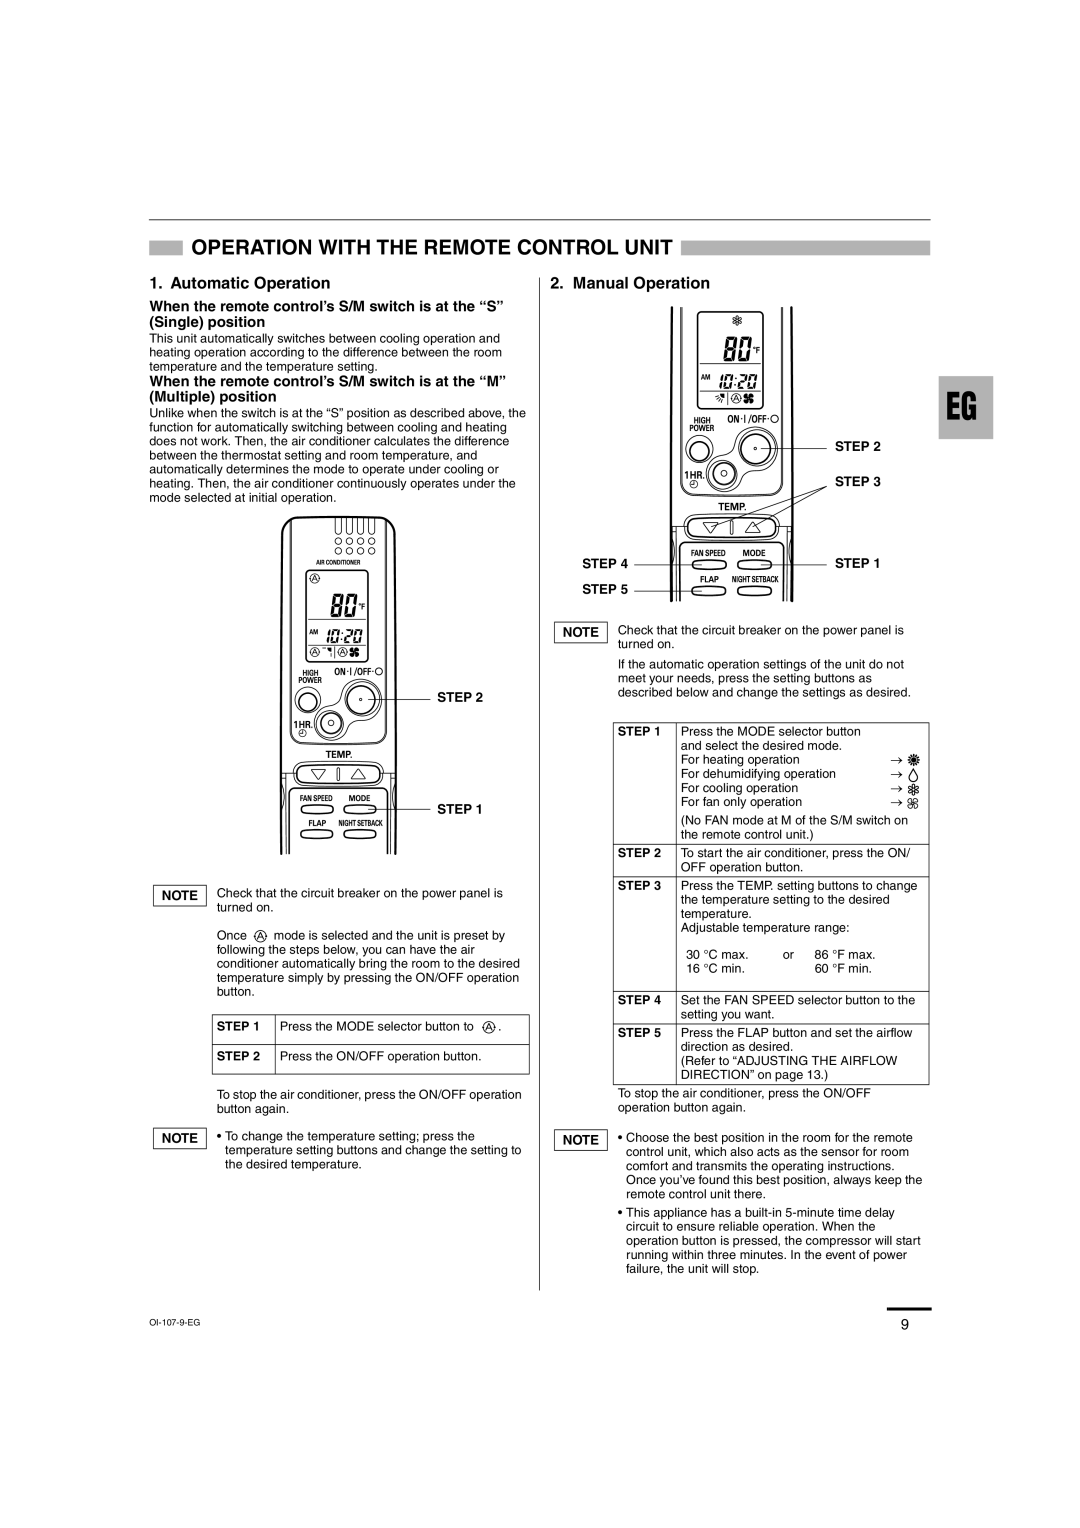 Sanyo XMHS1272, XMHS0972 service manual Operation With The Remote Control Unit, Automatic Operation, Manual Operation 